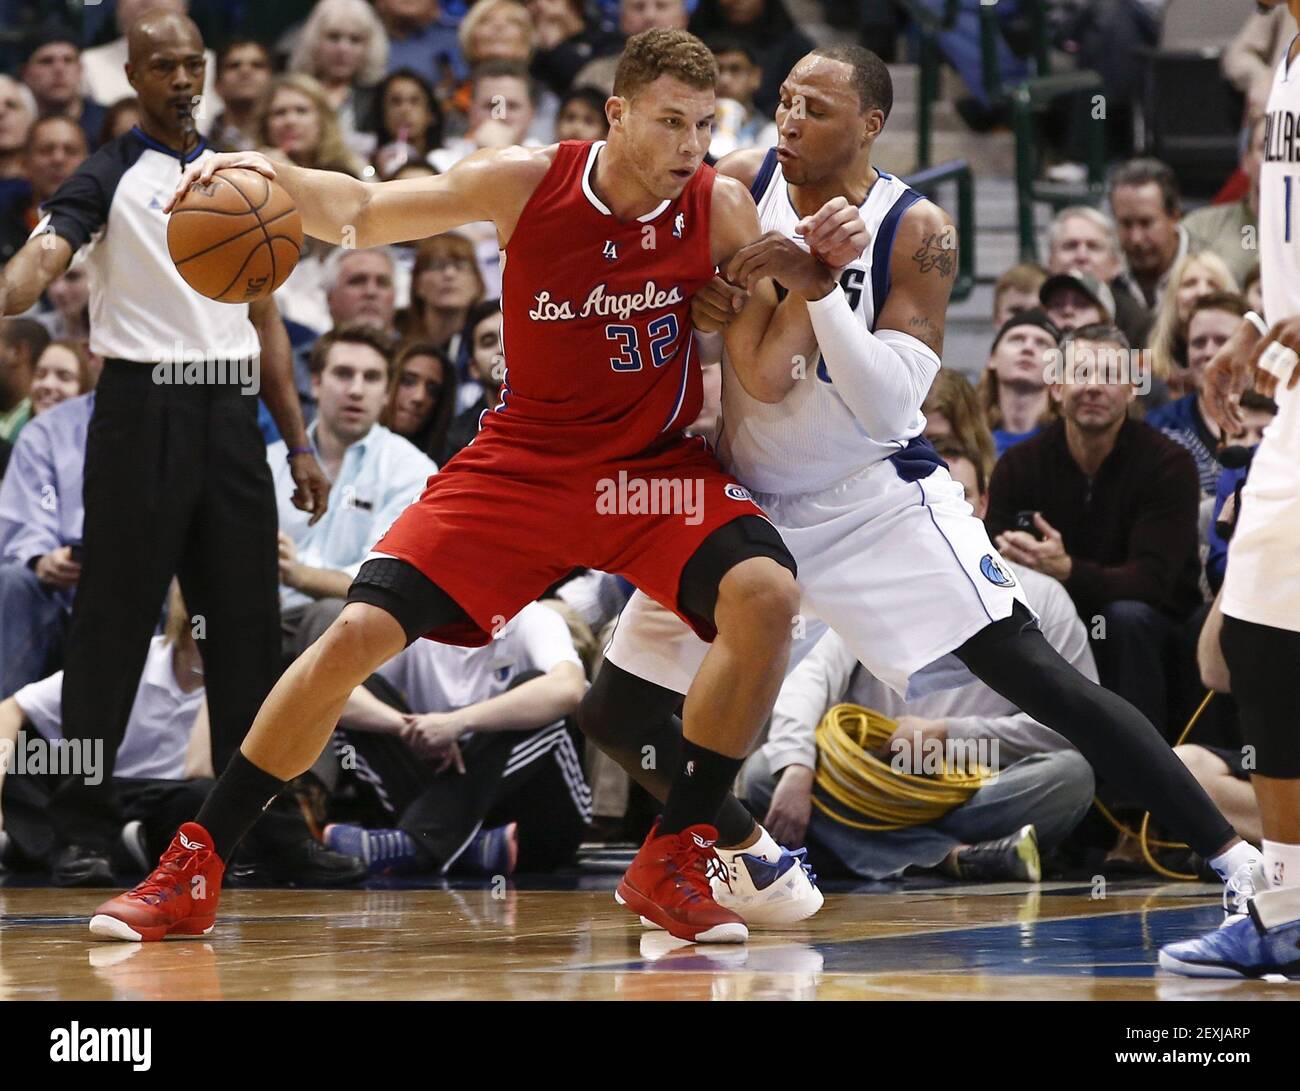 Los Angeles Clippers power forward Blake Griffin (32) drives against Dallas Mavericks small forward Shawn Marion (0) during the game at the American Airlines Center in Dallas, Friday, Jan. 3, 2014. The Clippers beat the Mavericks, 119-112. (Photo by Jim Cowsert/Fort Worth Star-Telegram/MCT/Sipa USA) Stock Photo